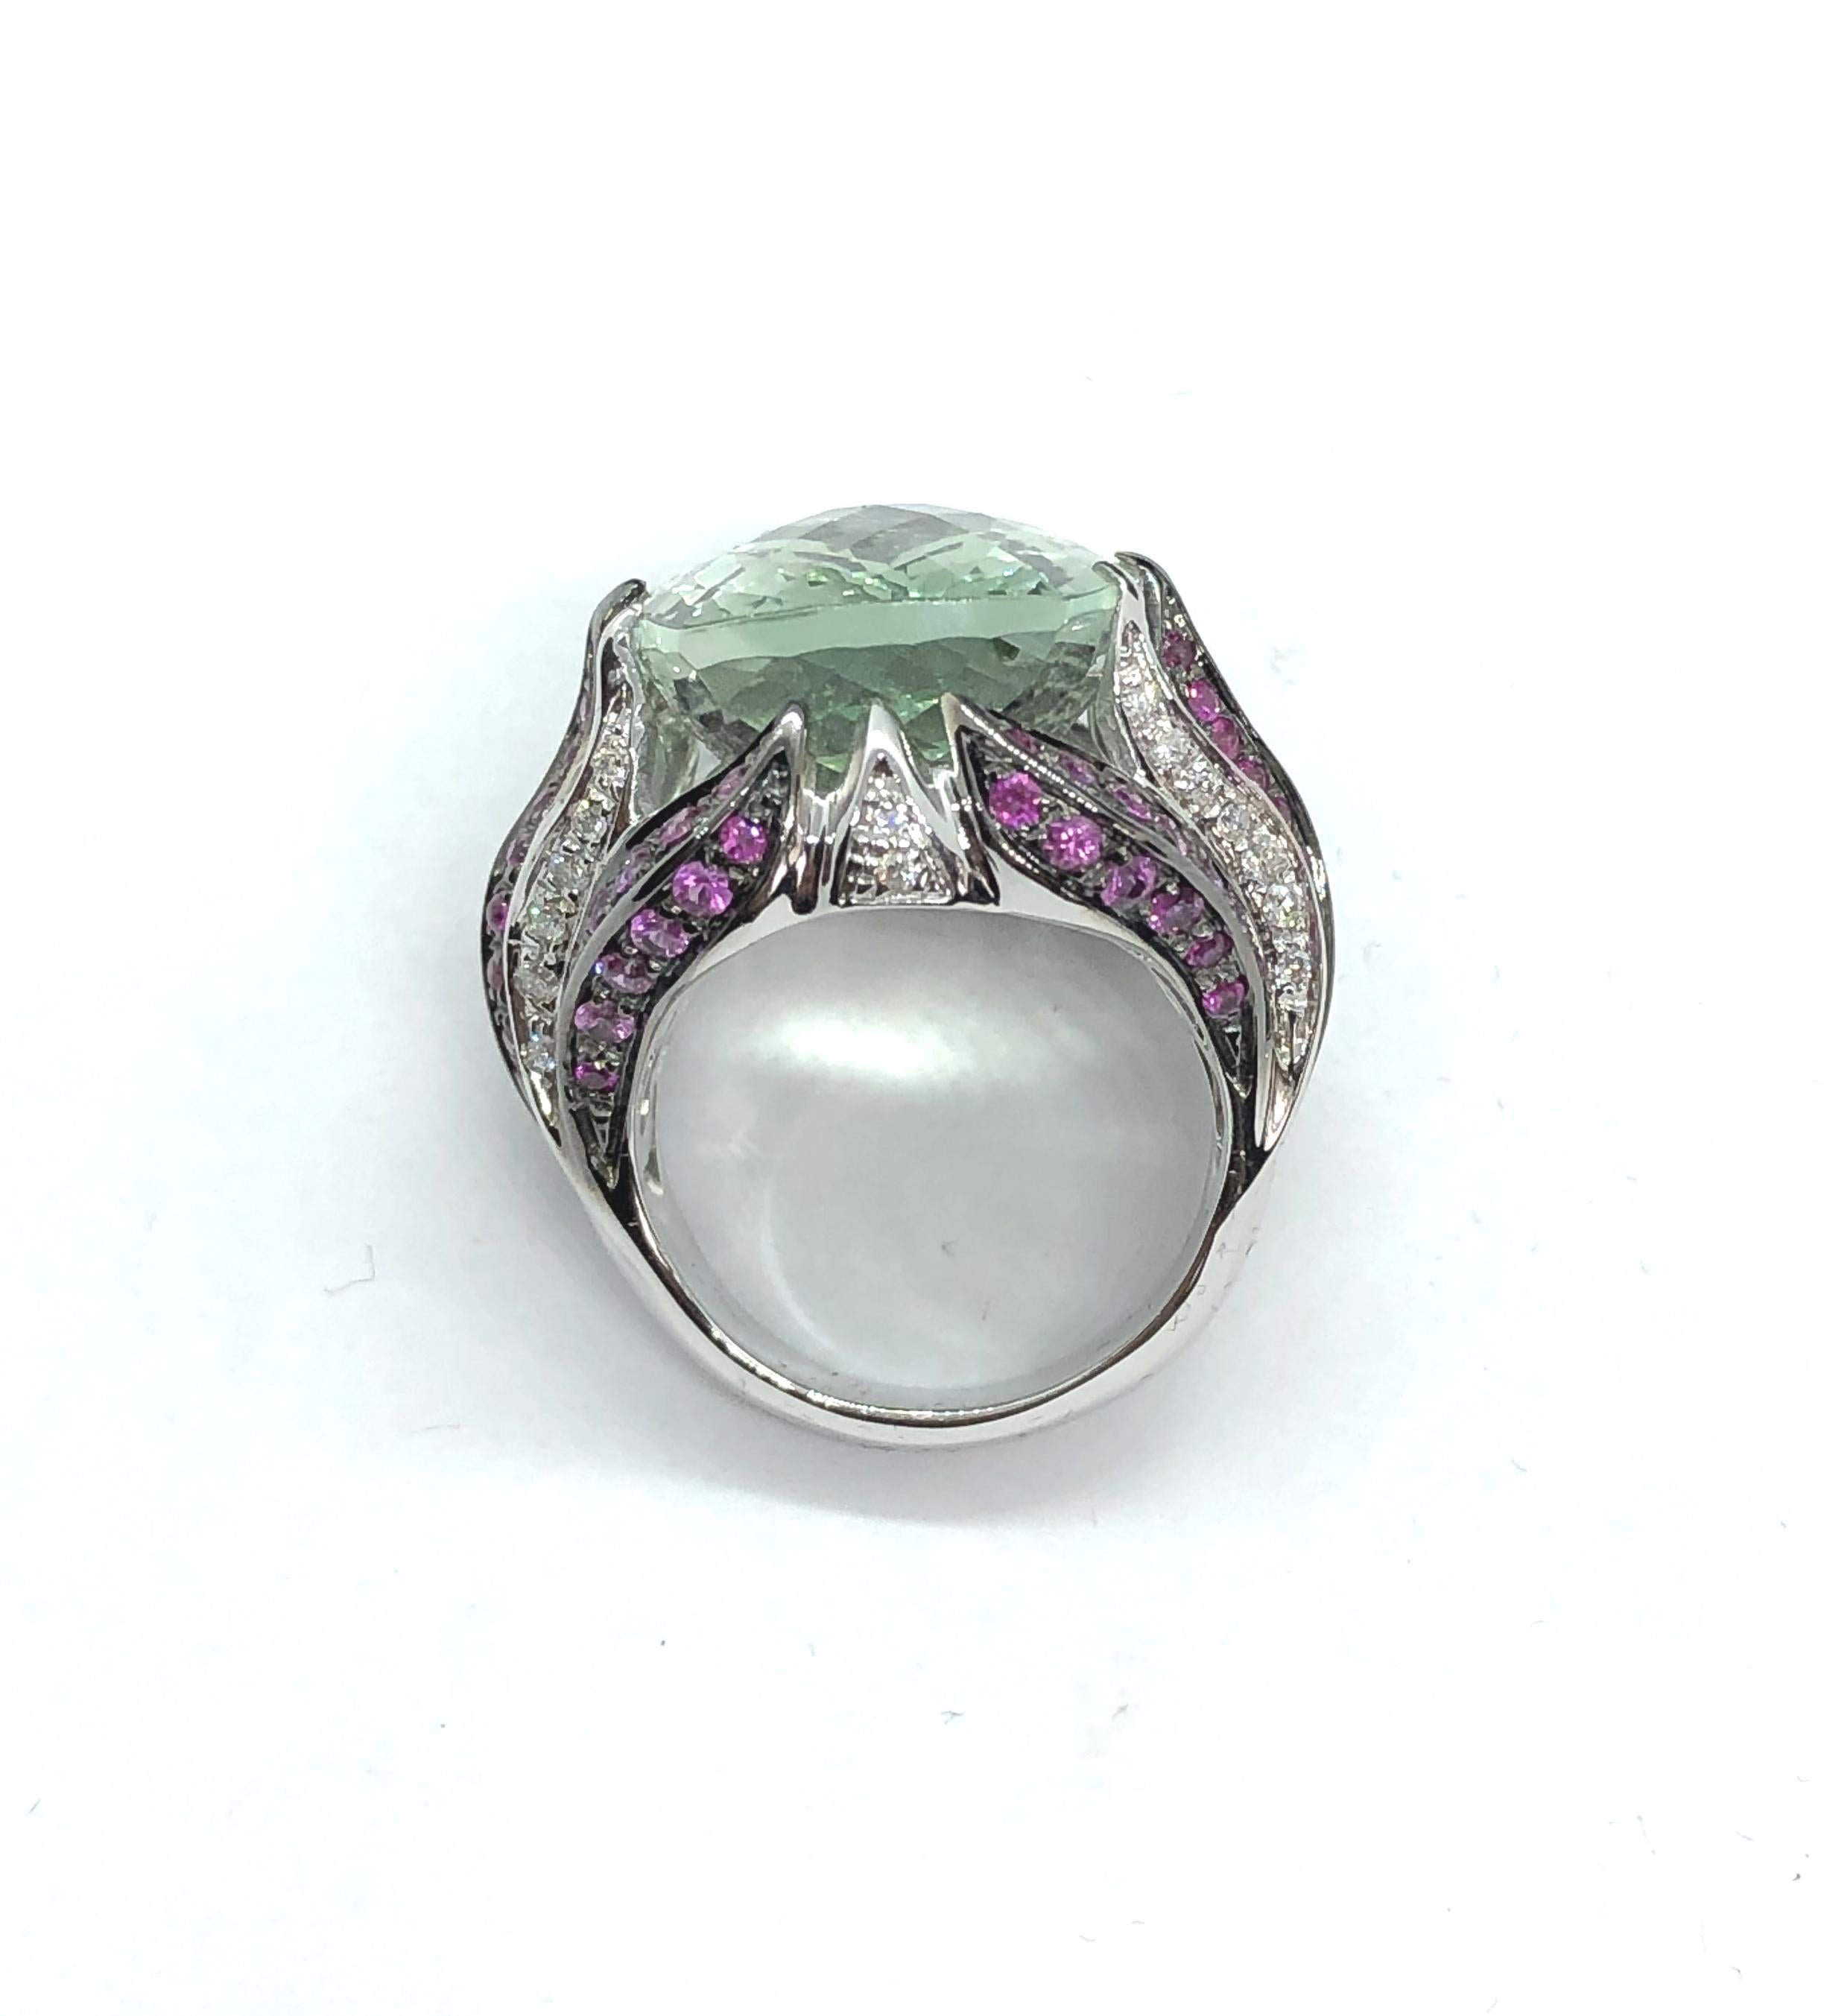 23 Ct Green Prasiolite White Gold Cocktail Ring Diamond and Pink Sapphires Flame For Sale 2